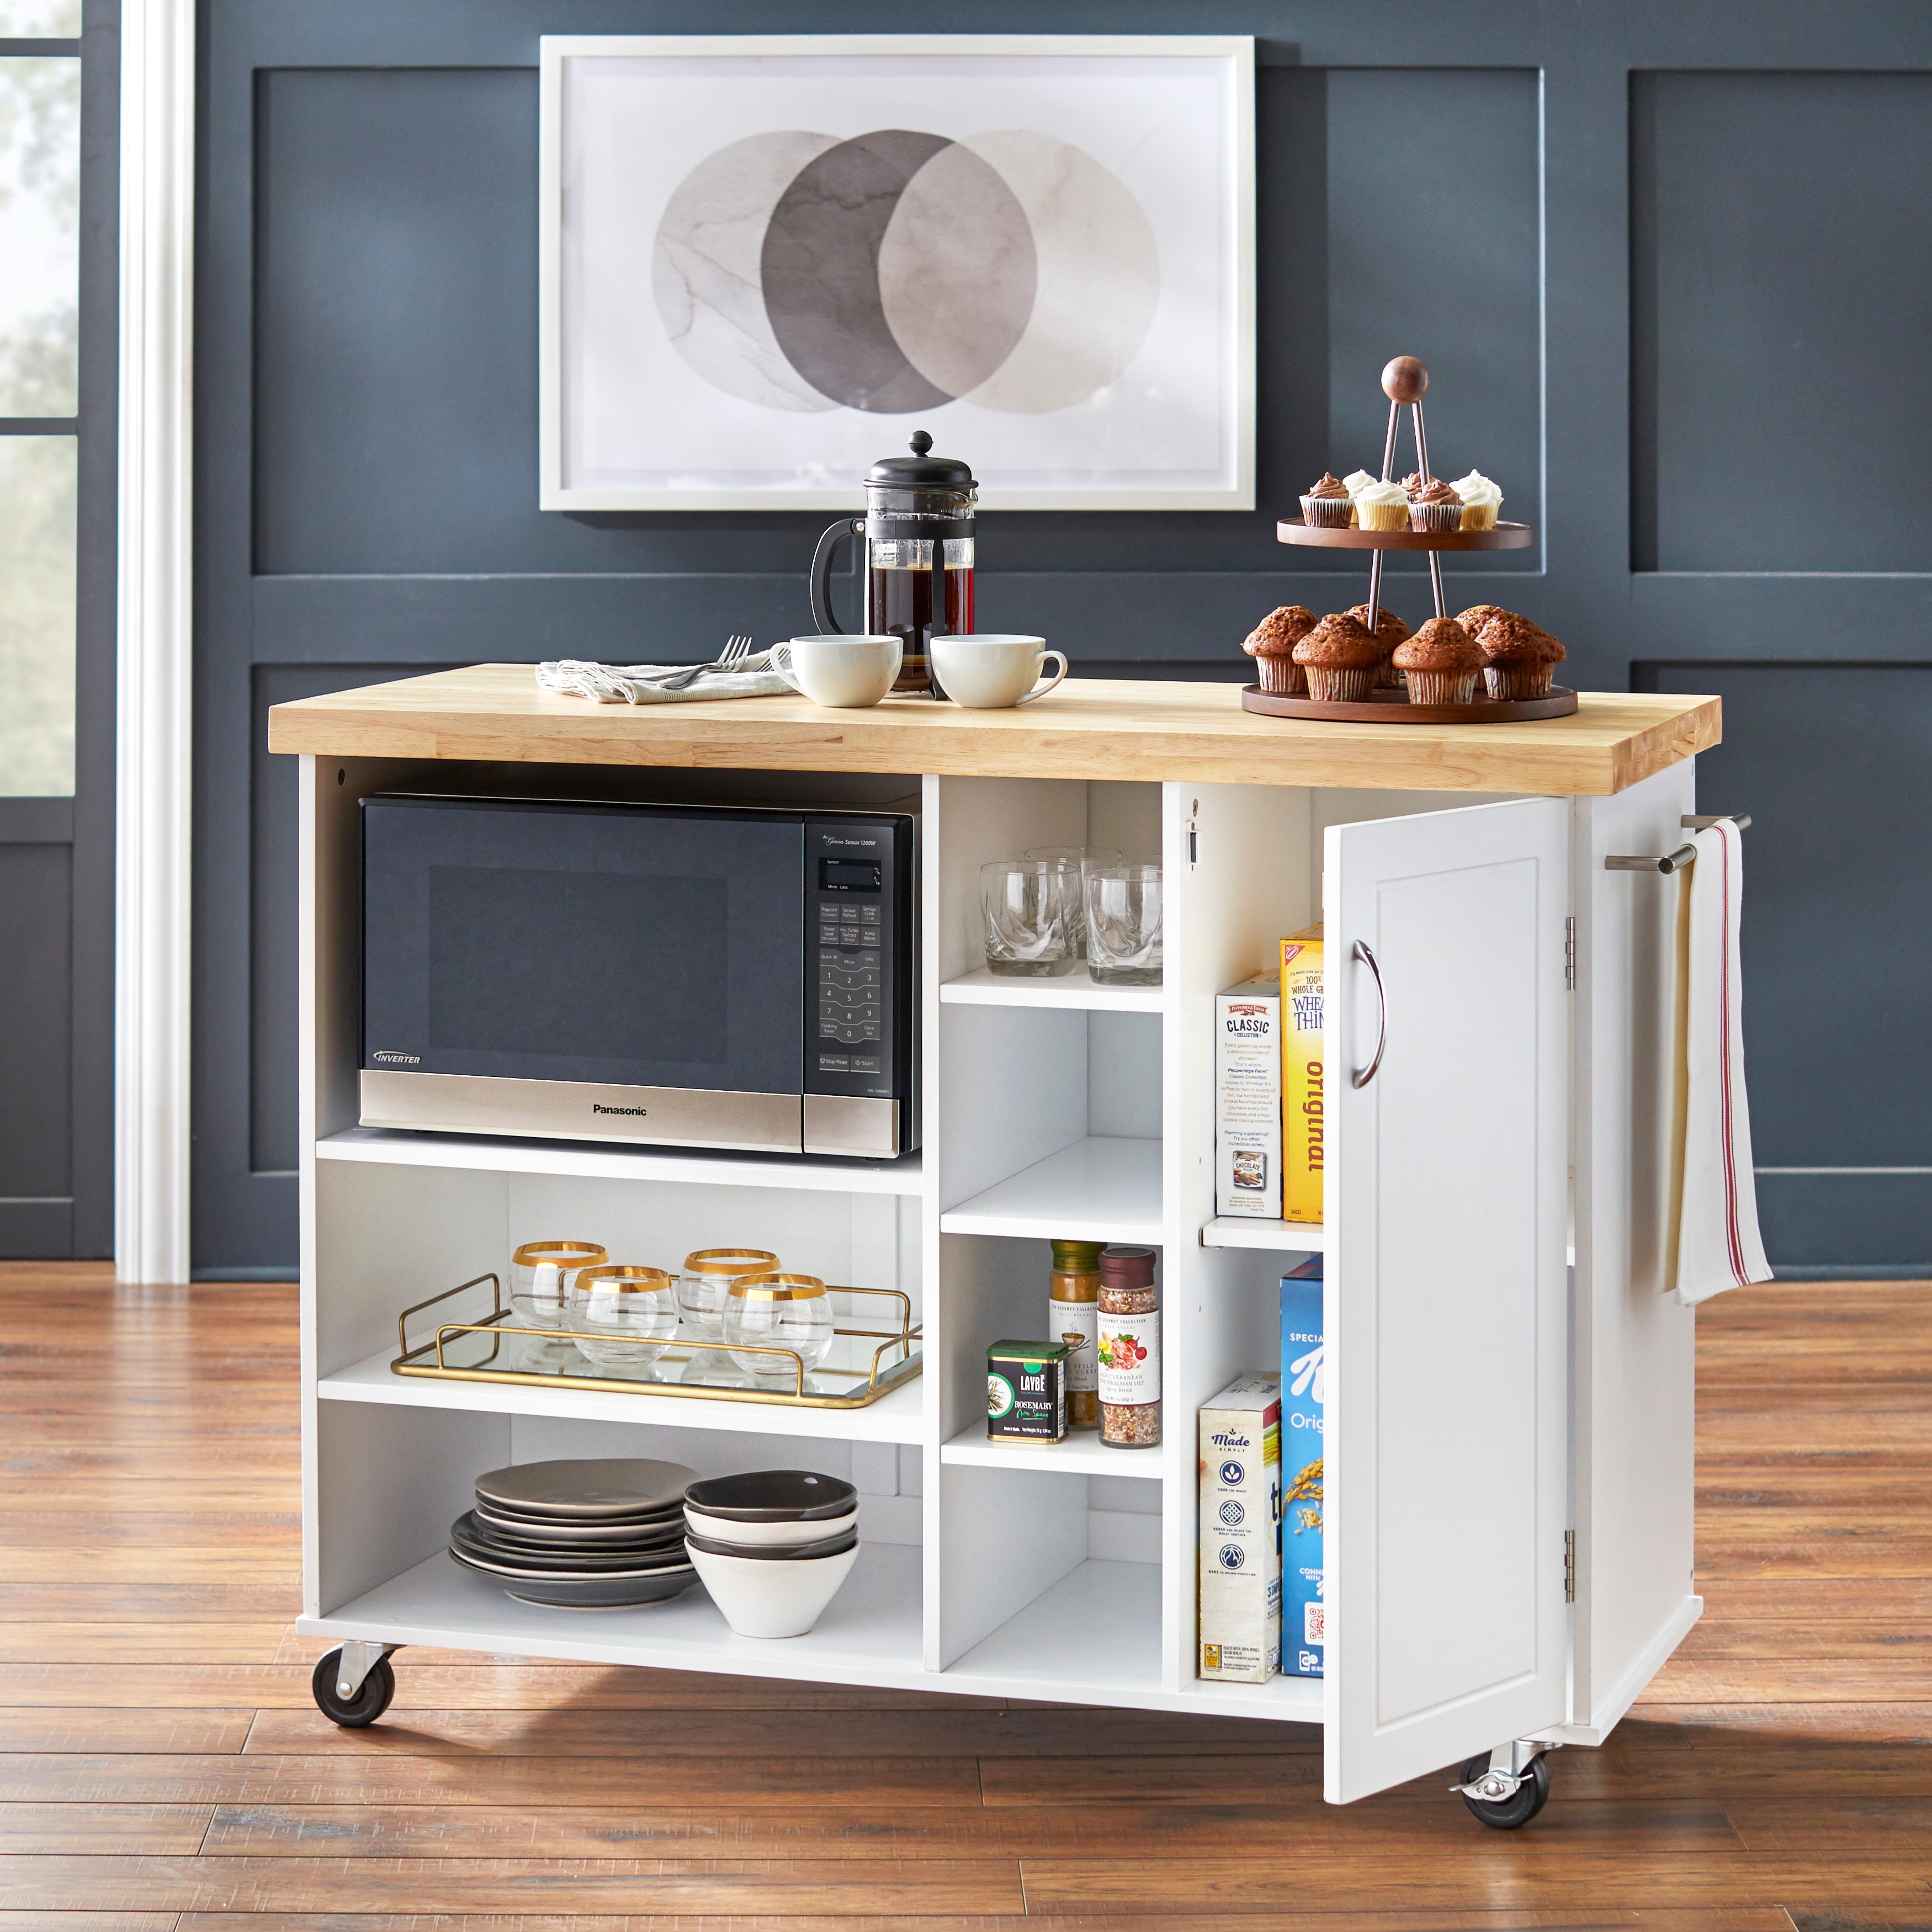 https://ak1.ostkcdn.com/images/products/is/images/direct/4c4f9d9f97dccbf6f4e683eb89ea916498f7c50f/Simple-Living-Rolling-Galvin-Microwave-Cart.jpg